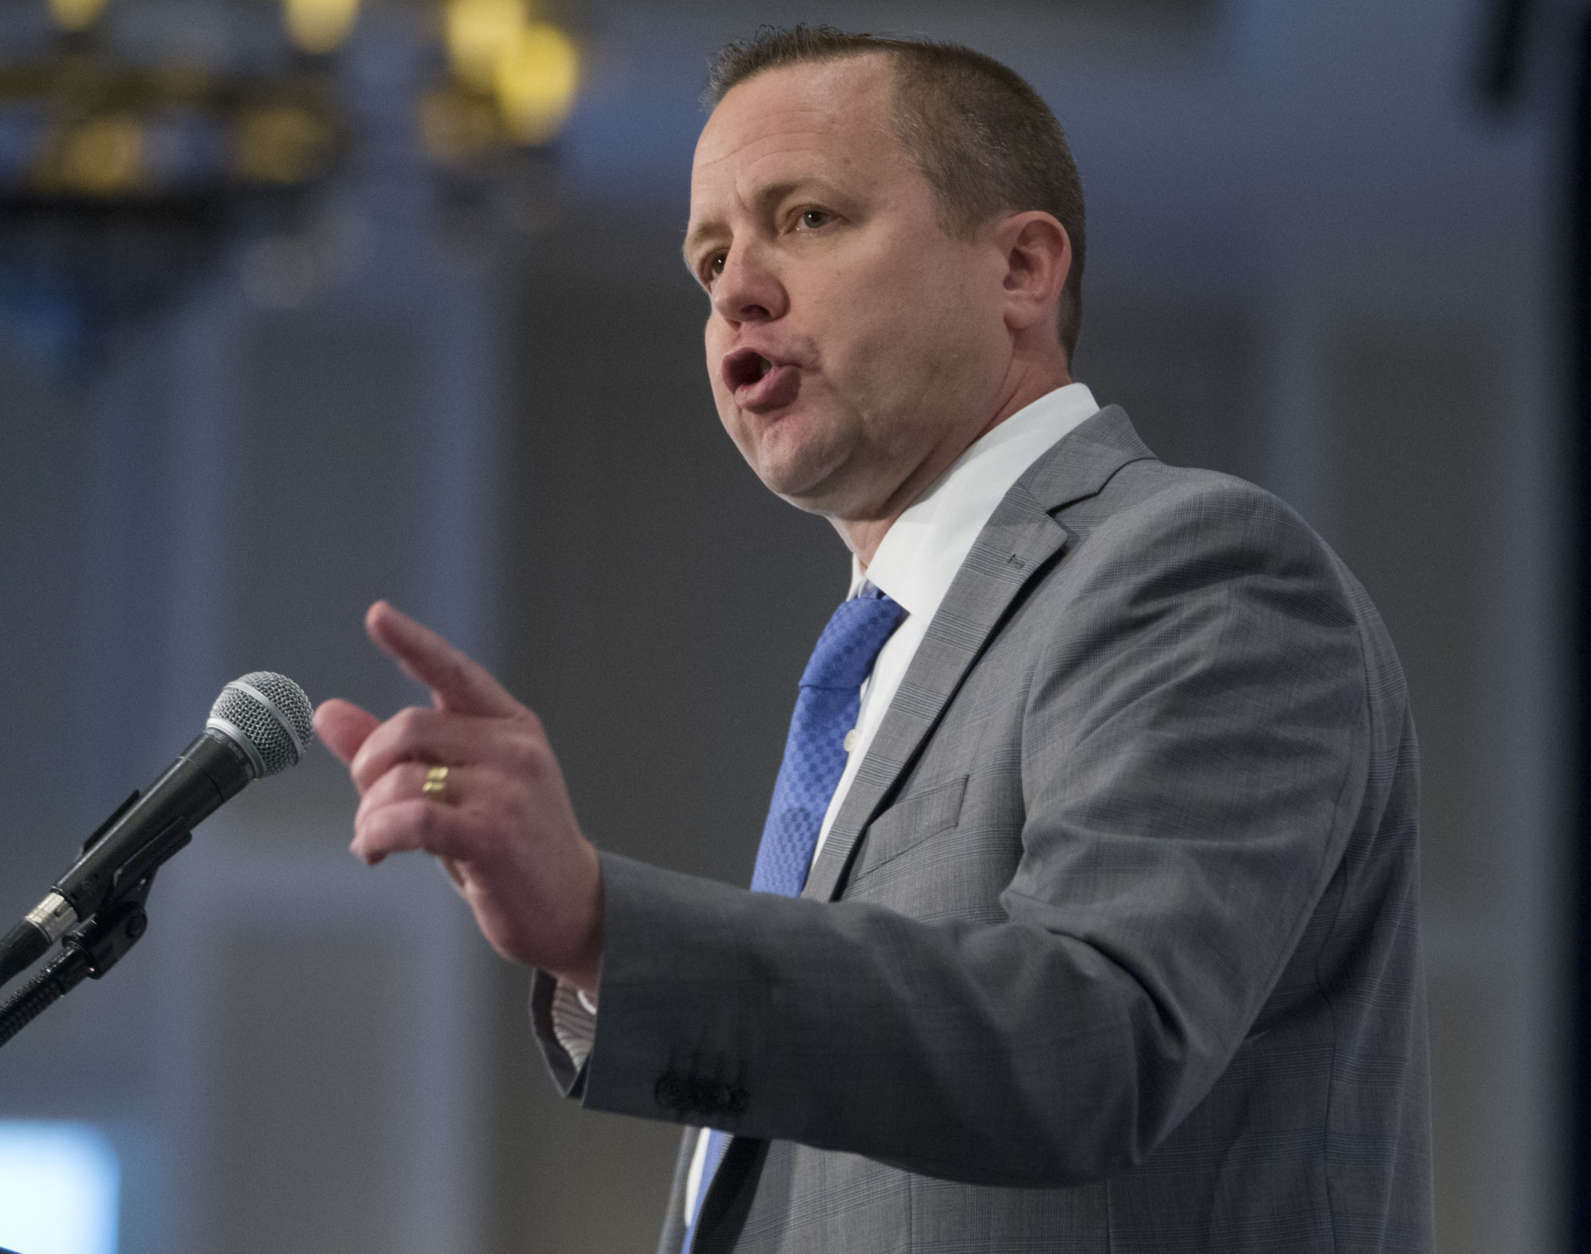 Republican candidate for Governor of Virginia, Corey Stewart, gestures as he speaks at the Virginia Chamber of Commerce Economic Summit at Colonial Williamsburg in Williamsburg, Va., Friday, Dec. 2, 2016. (AP Photo/Steve Helber)